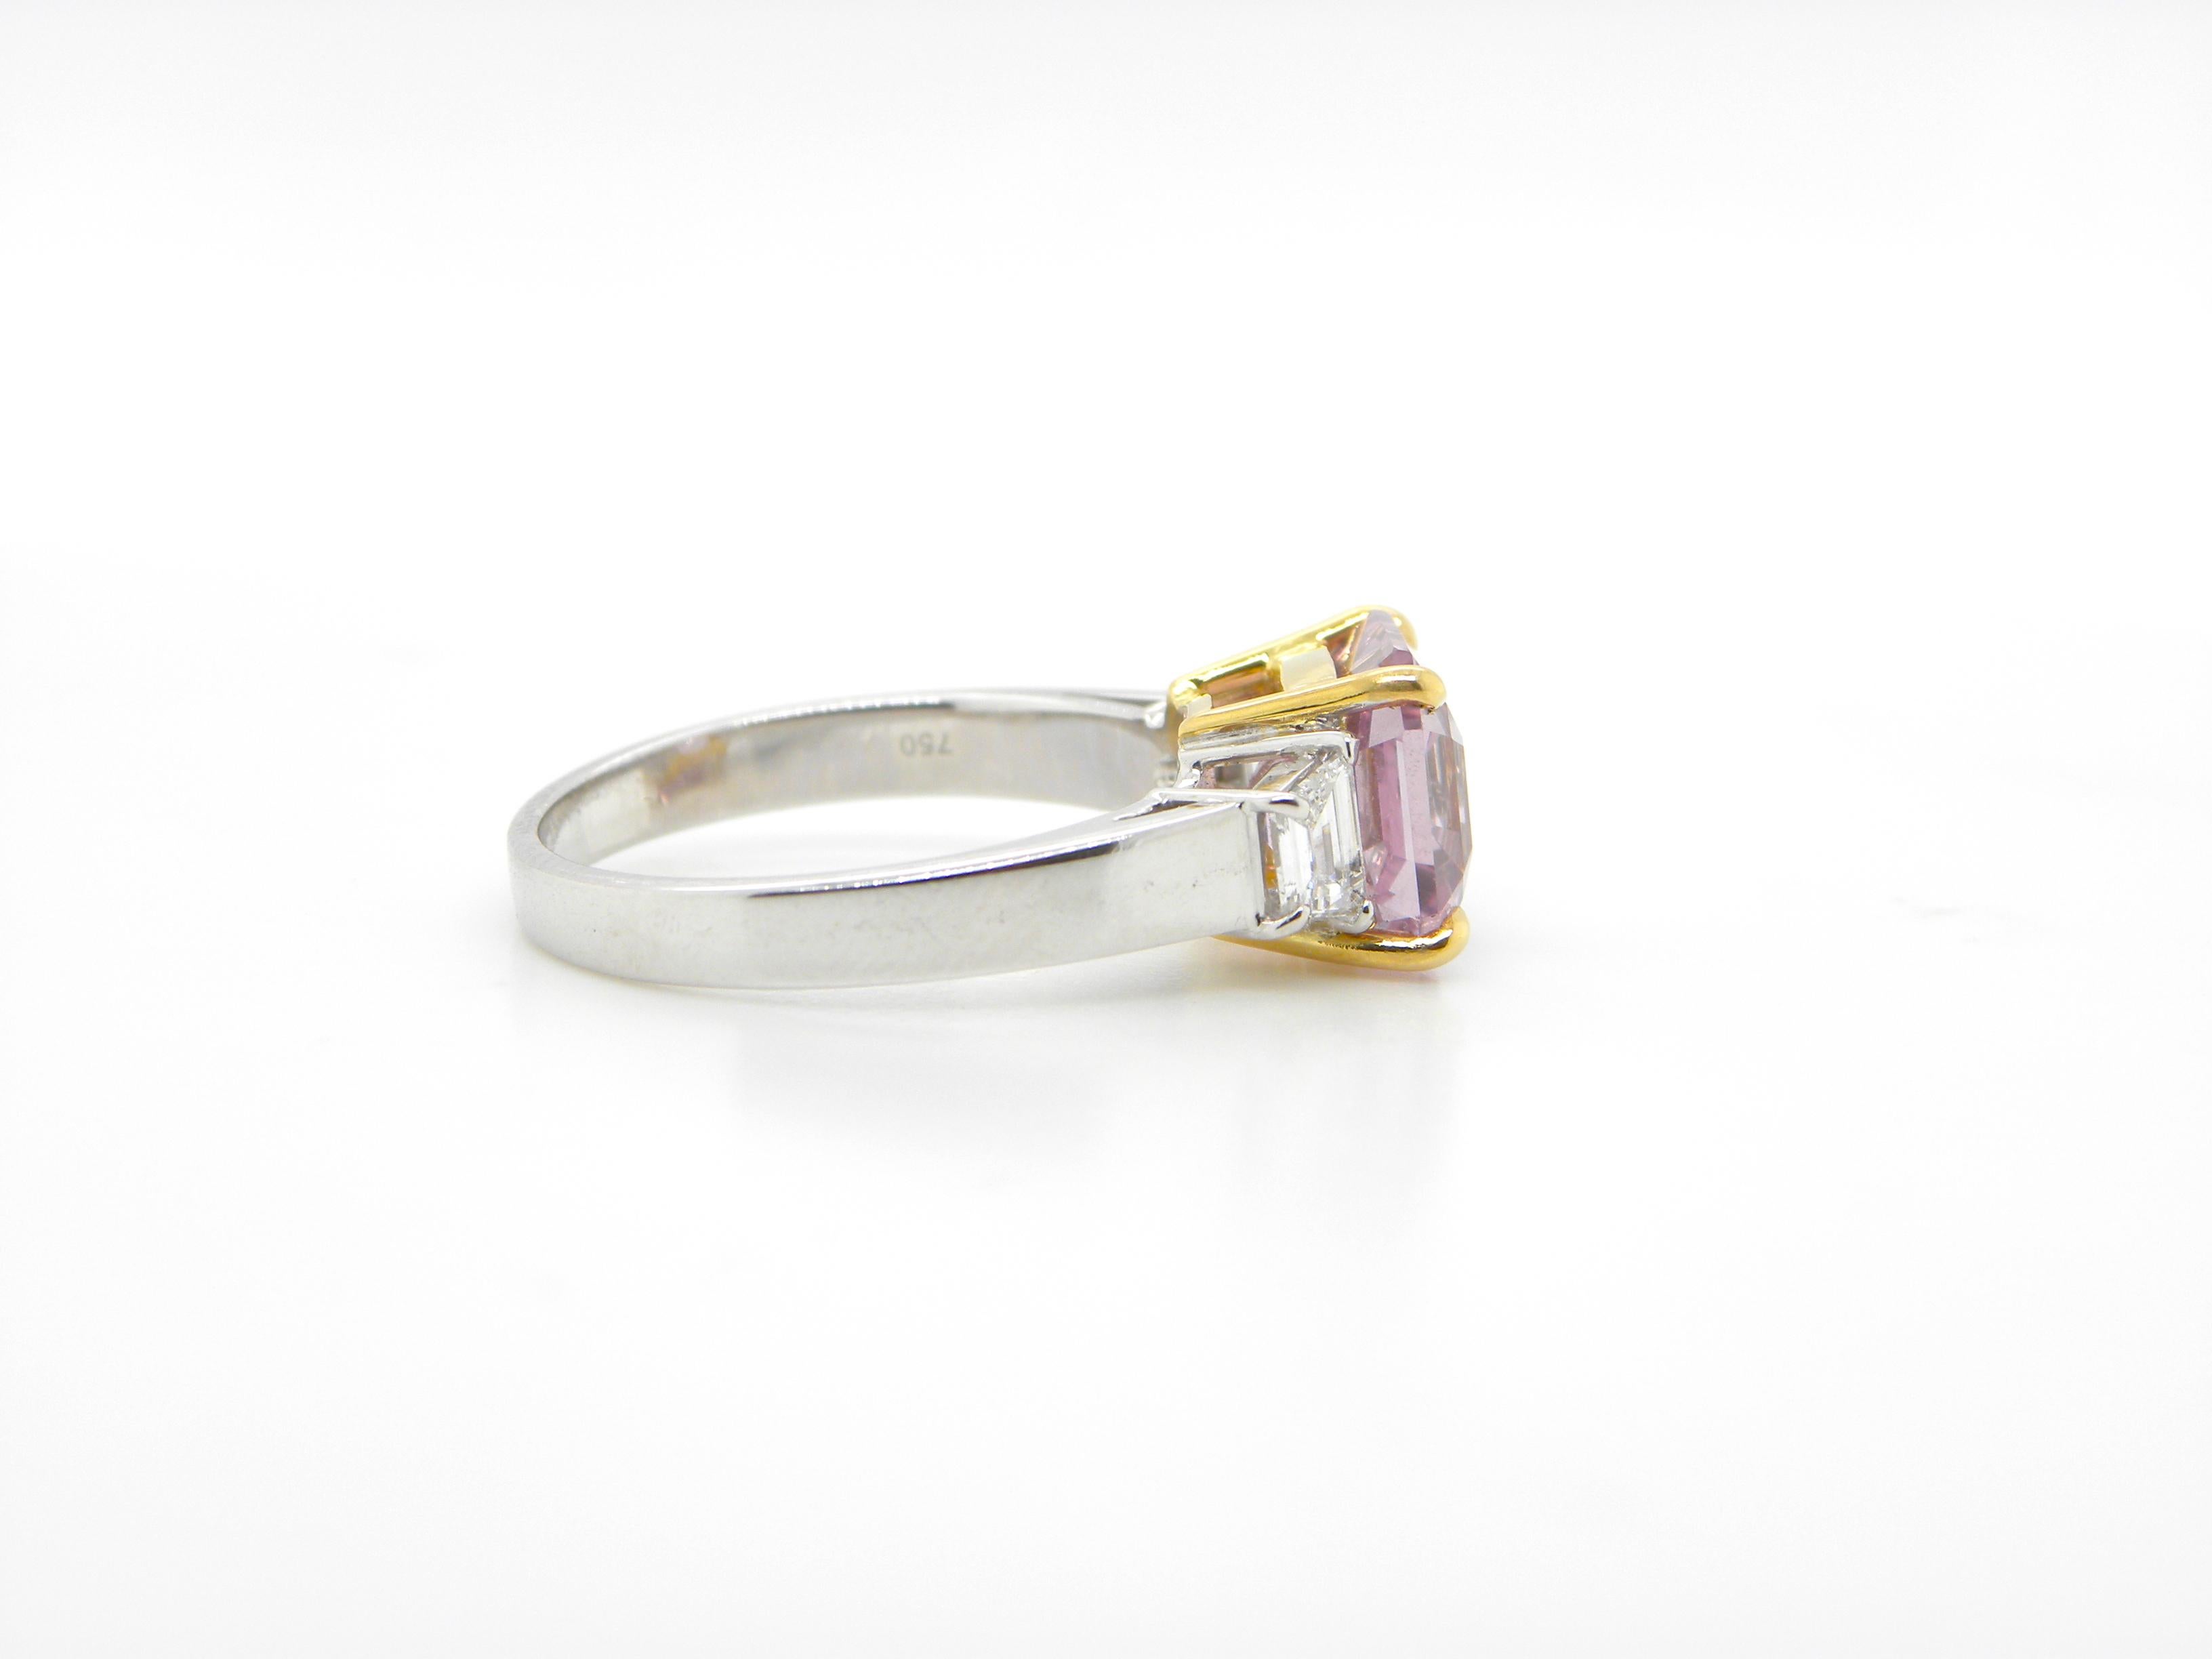 Octagon Cut 4.22 Carat Unheated Burmese Pink Spinel and White Diamond Engagement Ring